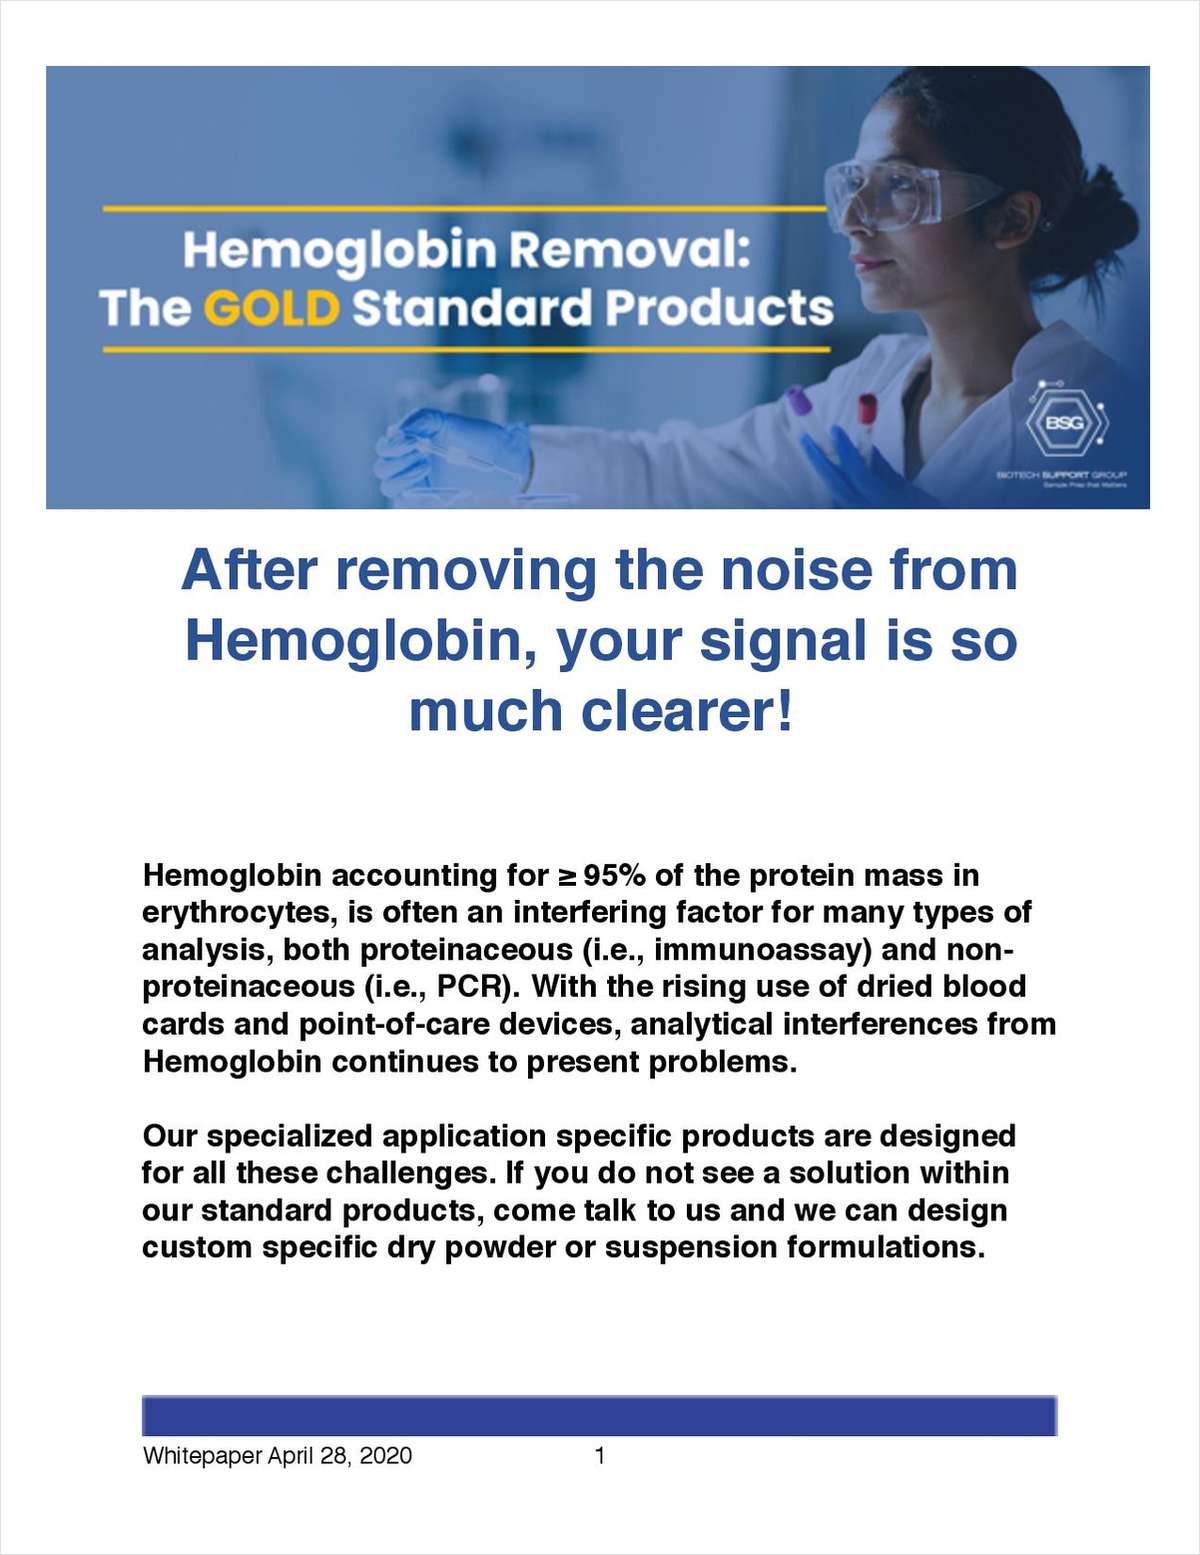 Hemoglobin Removal: The Gold Standard Products